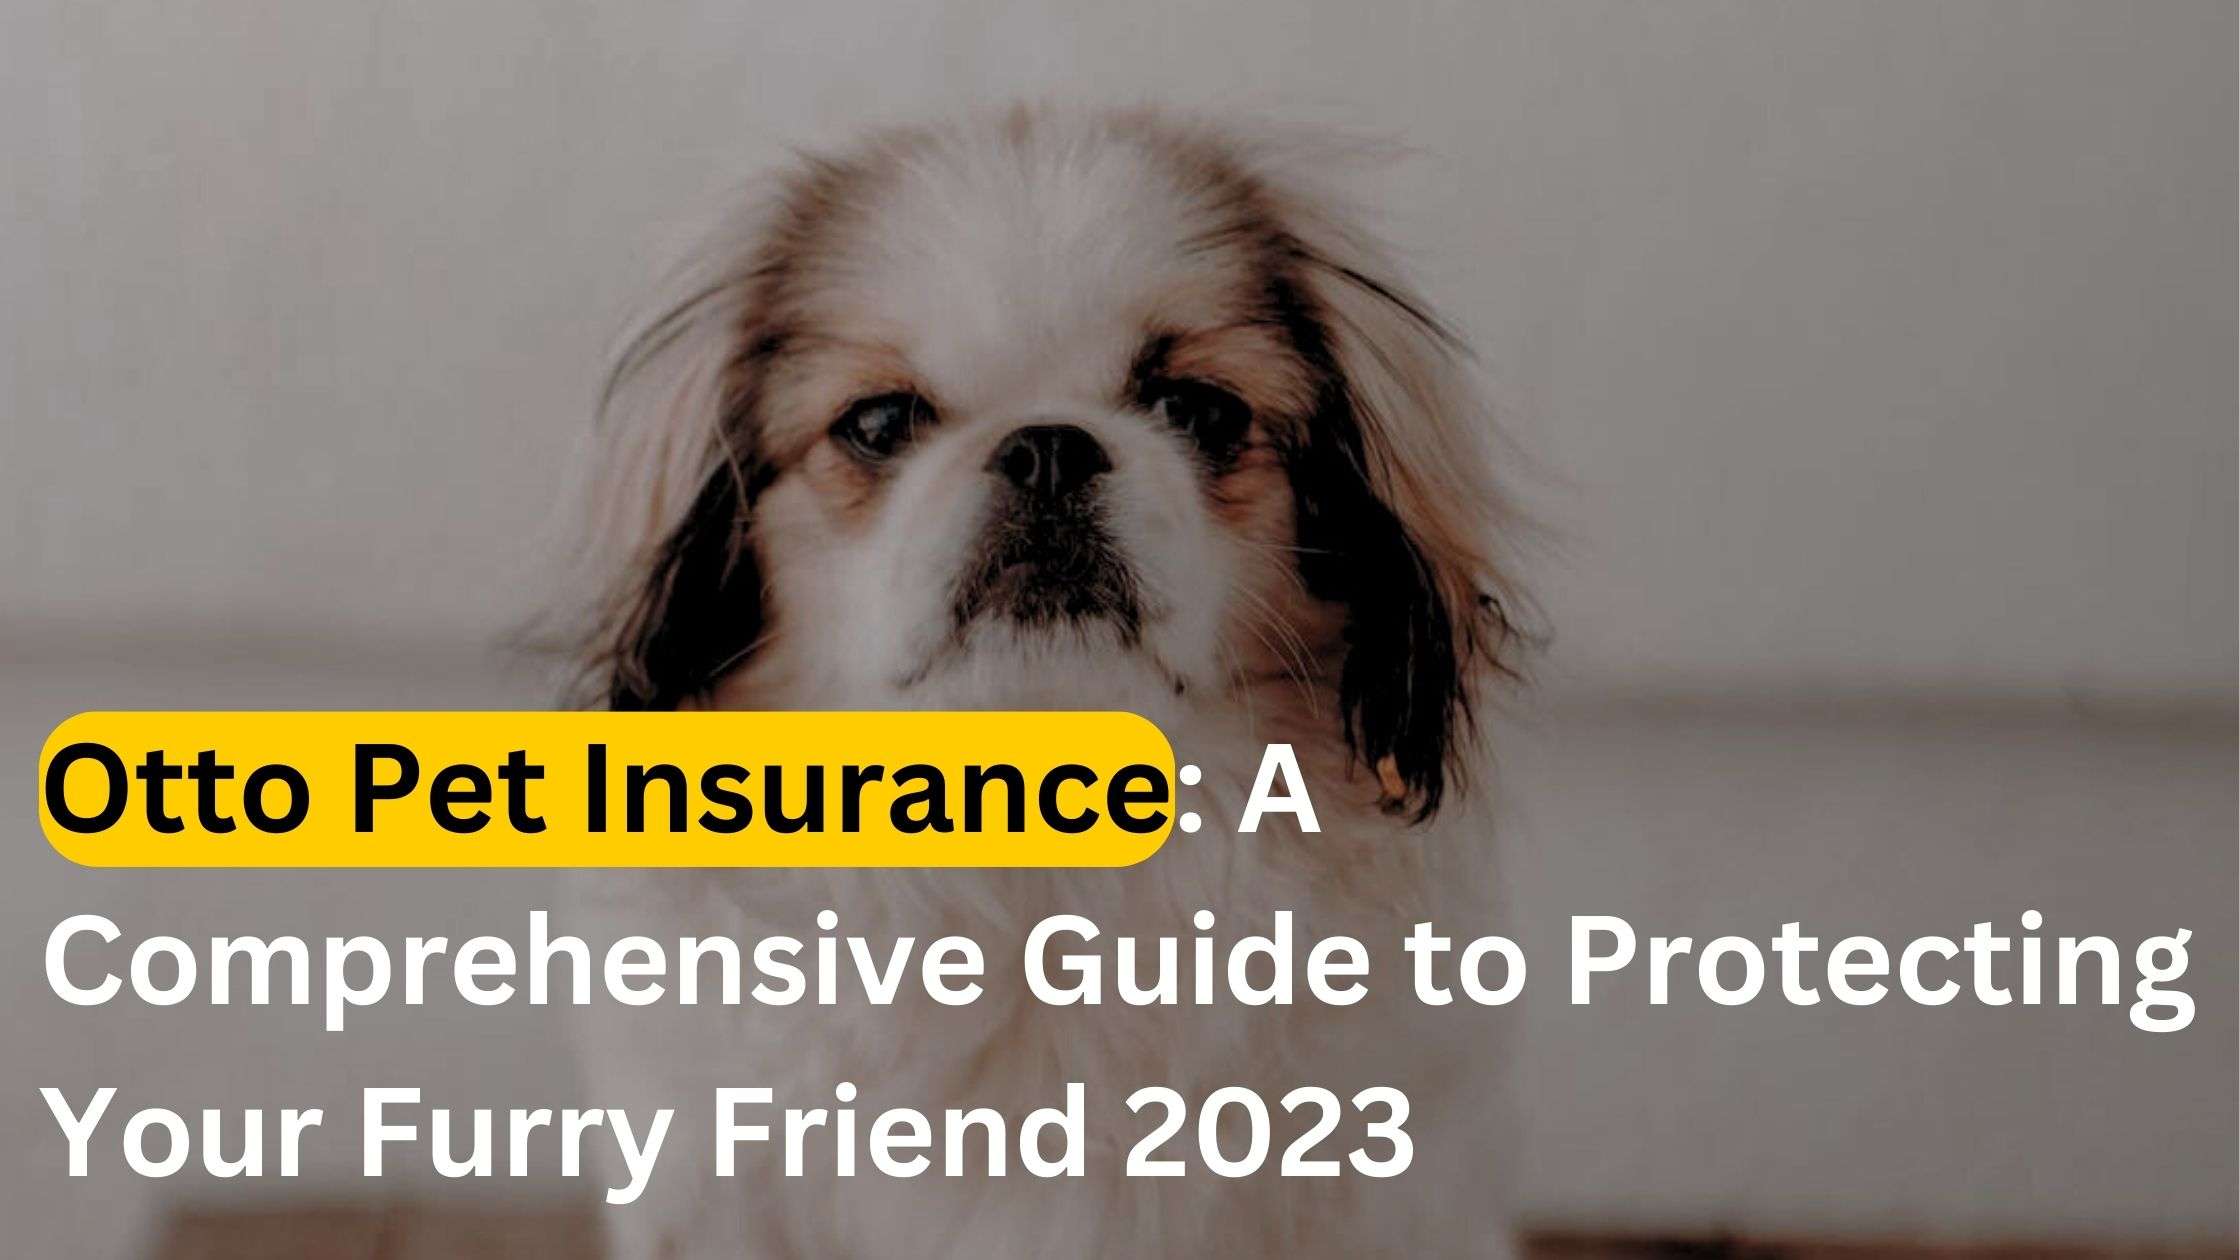 Otto Pet Insurance: A Comprehensive Guide to Protecting Your Furry Friend 2023